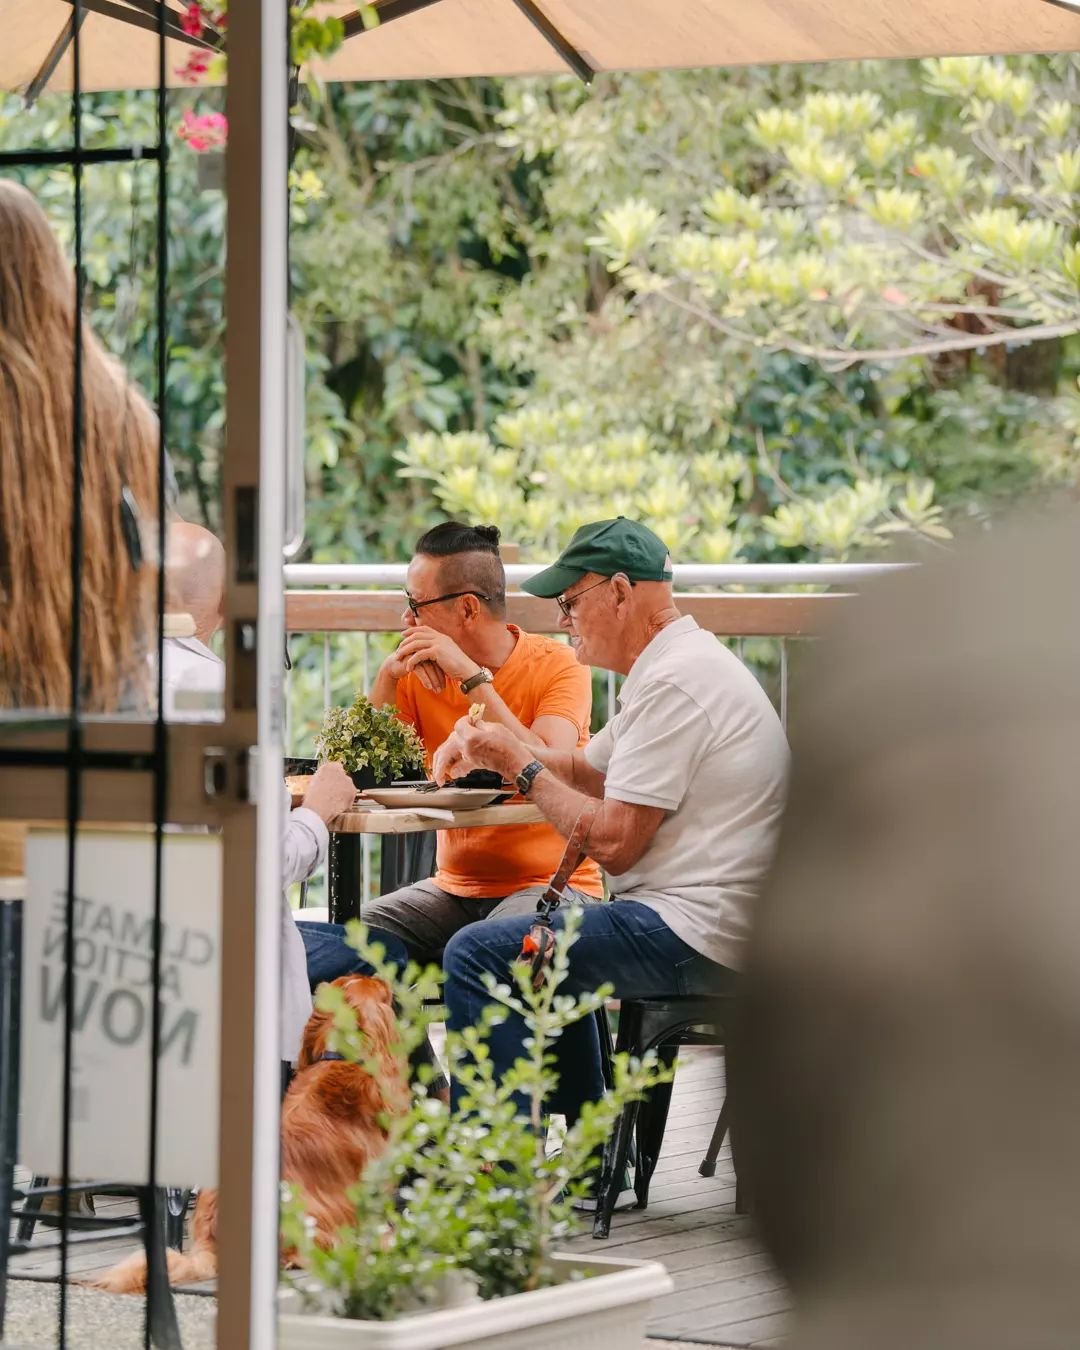 Cherished moments and warm conversations brew best over coffee at Concept Coffee 🍃☕💬. Gather with friends, furry pals included, and enjoy the serenity of our outdoor oasis.

#CafeHangout #CoffeeLovers #PetFriendly #OutdoorCafe #CommunitySpirit